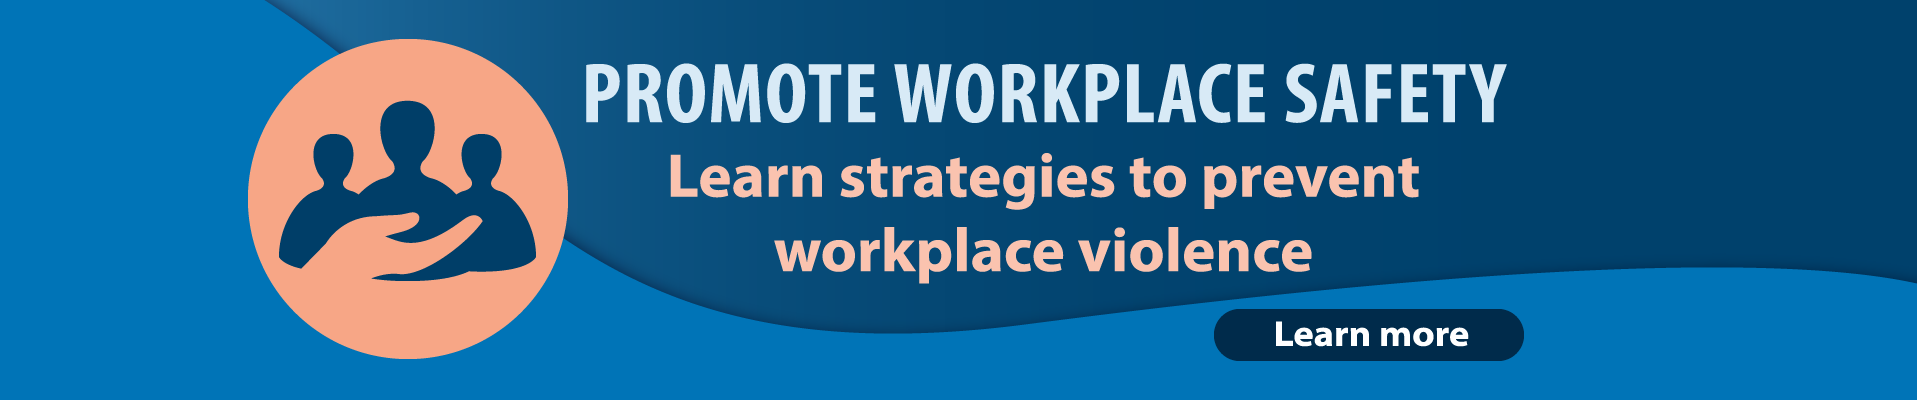 Promote Workplace Safety